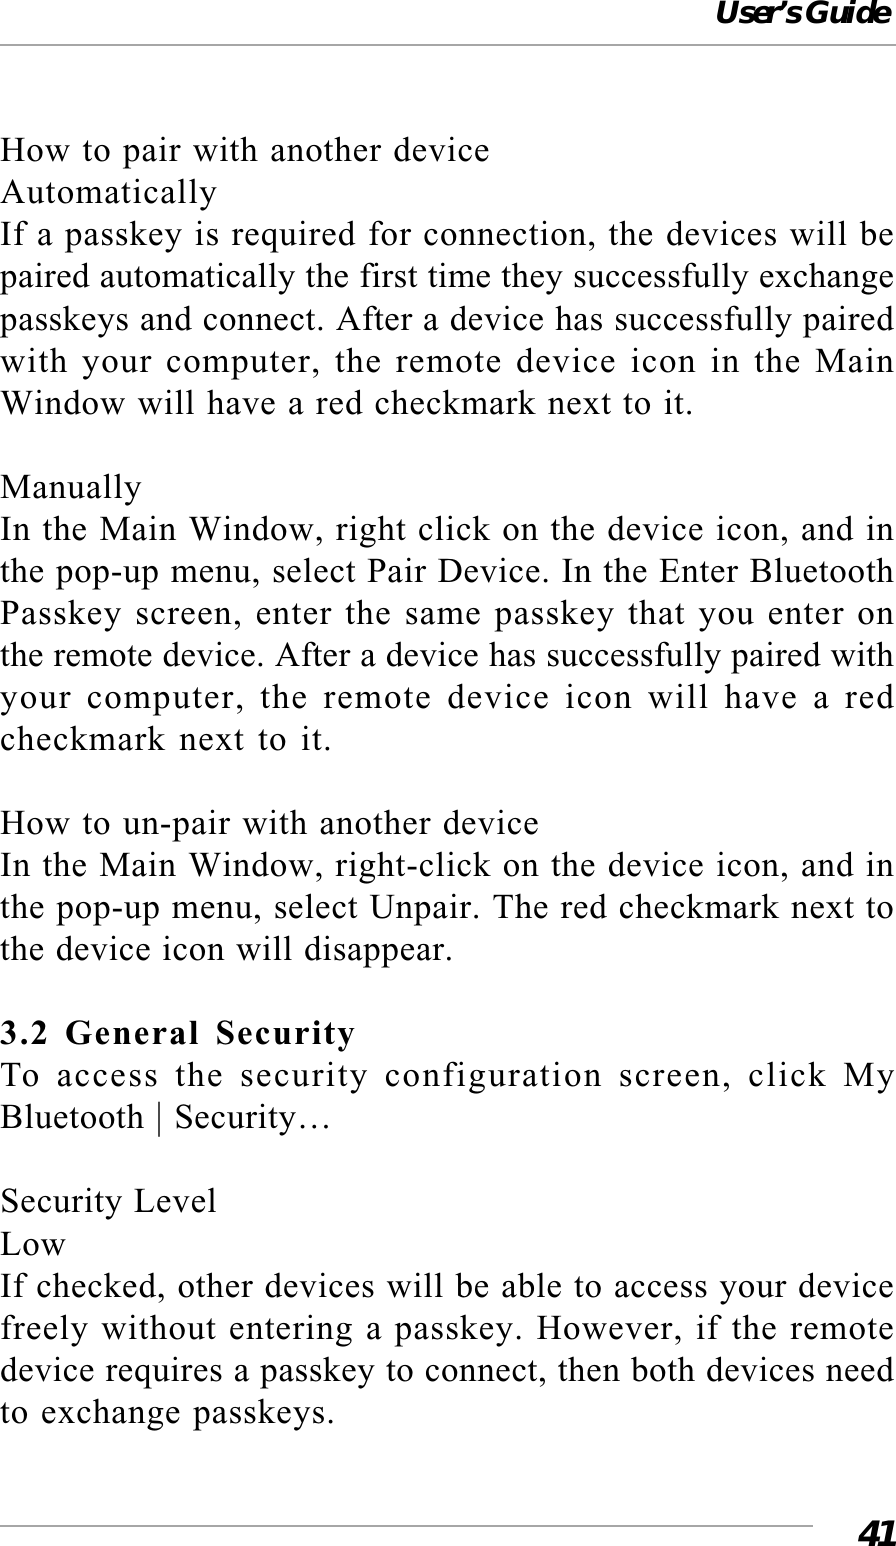 User’s Guide41How to pair with another deviceAutomaticallyIf a passkey is required for connection, the devices will bepaired automatically the first time they successfully exchangepasskeys and connect. After a device has successfully pairedwith your computer, the remote device icon in the MainWindow will have a red checkmark next to it.ManuallyIn the Main Window, right click on the device icon, and inthe pop-up menu, select Pair Device. In the Enter BluetoothPasskey screen, enter the same passkey that you enter onthe remote device. After a device has successfully paired withyour computer, the remote device icon will have a redcheckmark next to it.How to un-pair with another deviceIn the Main Window, right-click on the device icon, and inthe pop-up menu, select Unpair. The red checkmark next tothe device icon will disappear.3.2 General SecurityTo access the security configuration screen, click MyBluetooth | Security…Security LevelLowIf checked, other devices will be able to access your devicefreely without entering a passkey. However, if the remotedevice requires a passkey to connect, then both devices needto exchange passkeys.